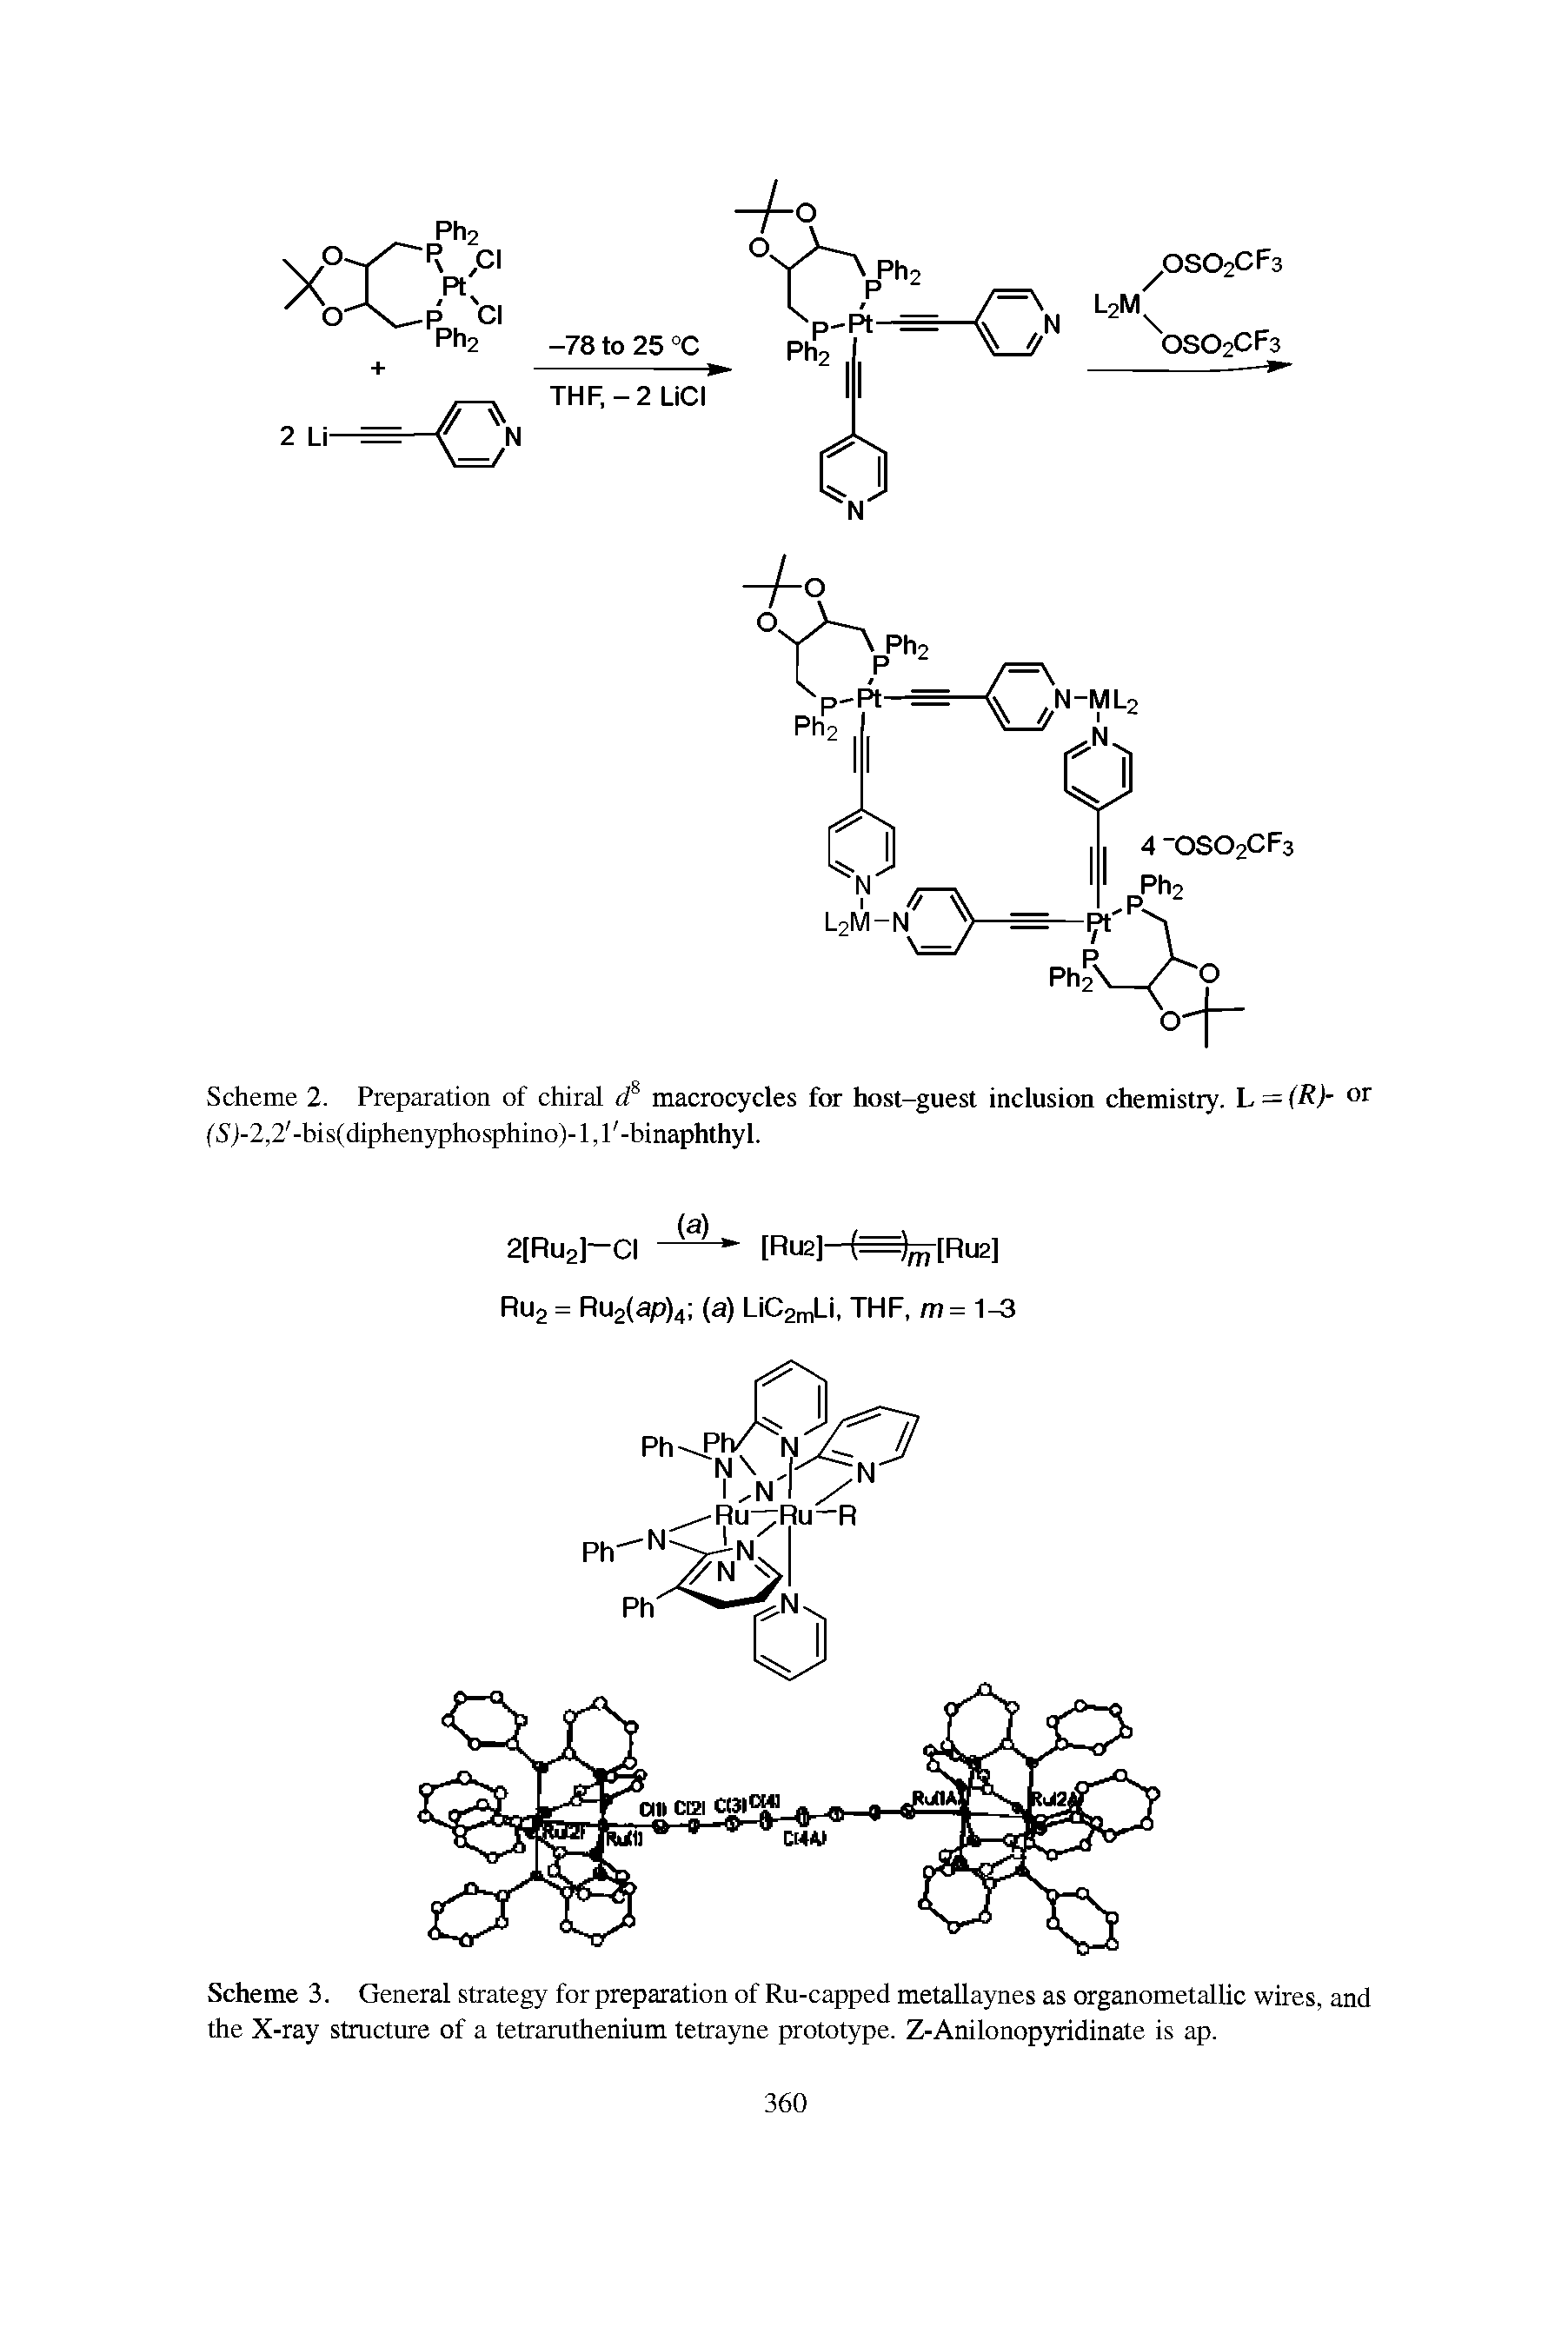 Scheme 2. Preparation of chiral <f macrocycles for host-guest inclusion chemistry. L = fR>- 01 (S j-2,2 -bis(diphenyphosphino)-1,1 -binaphthyl.